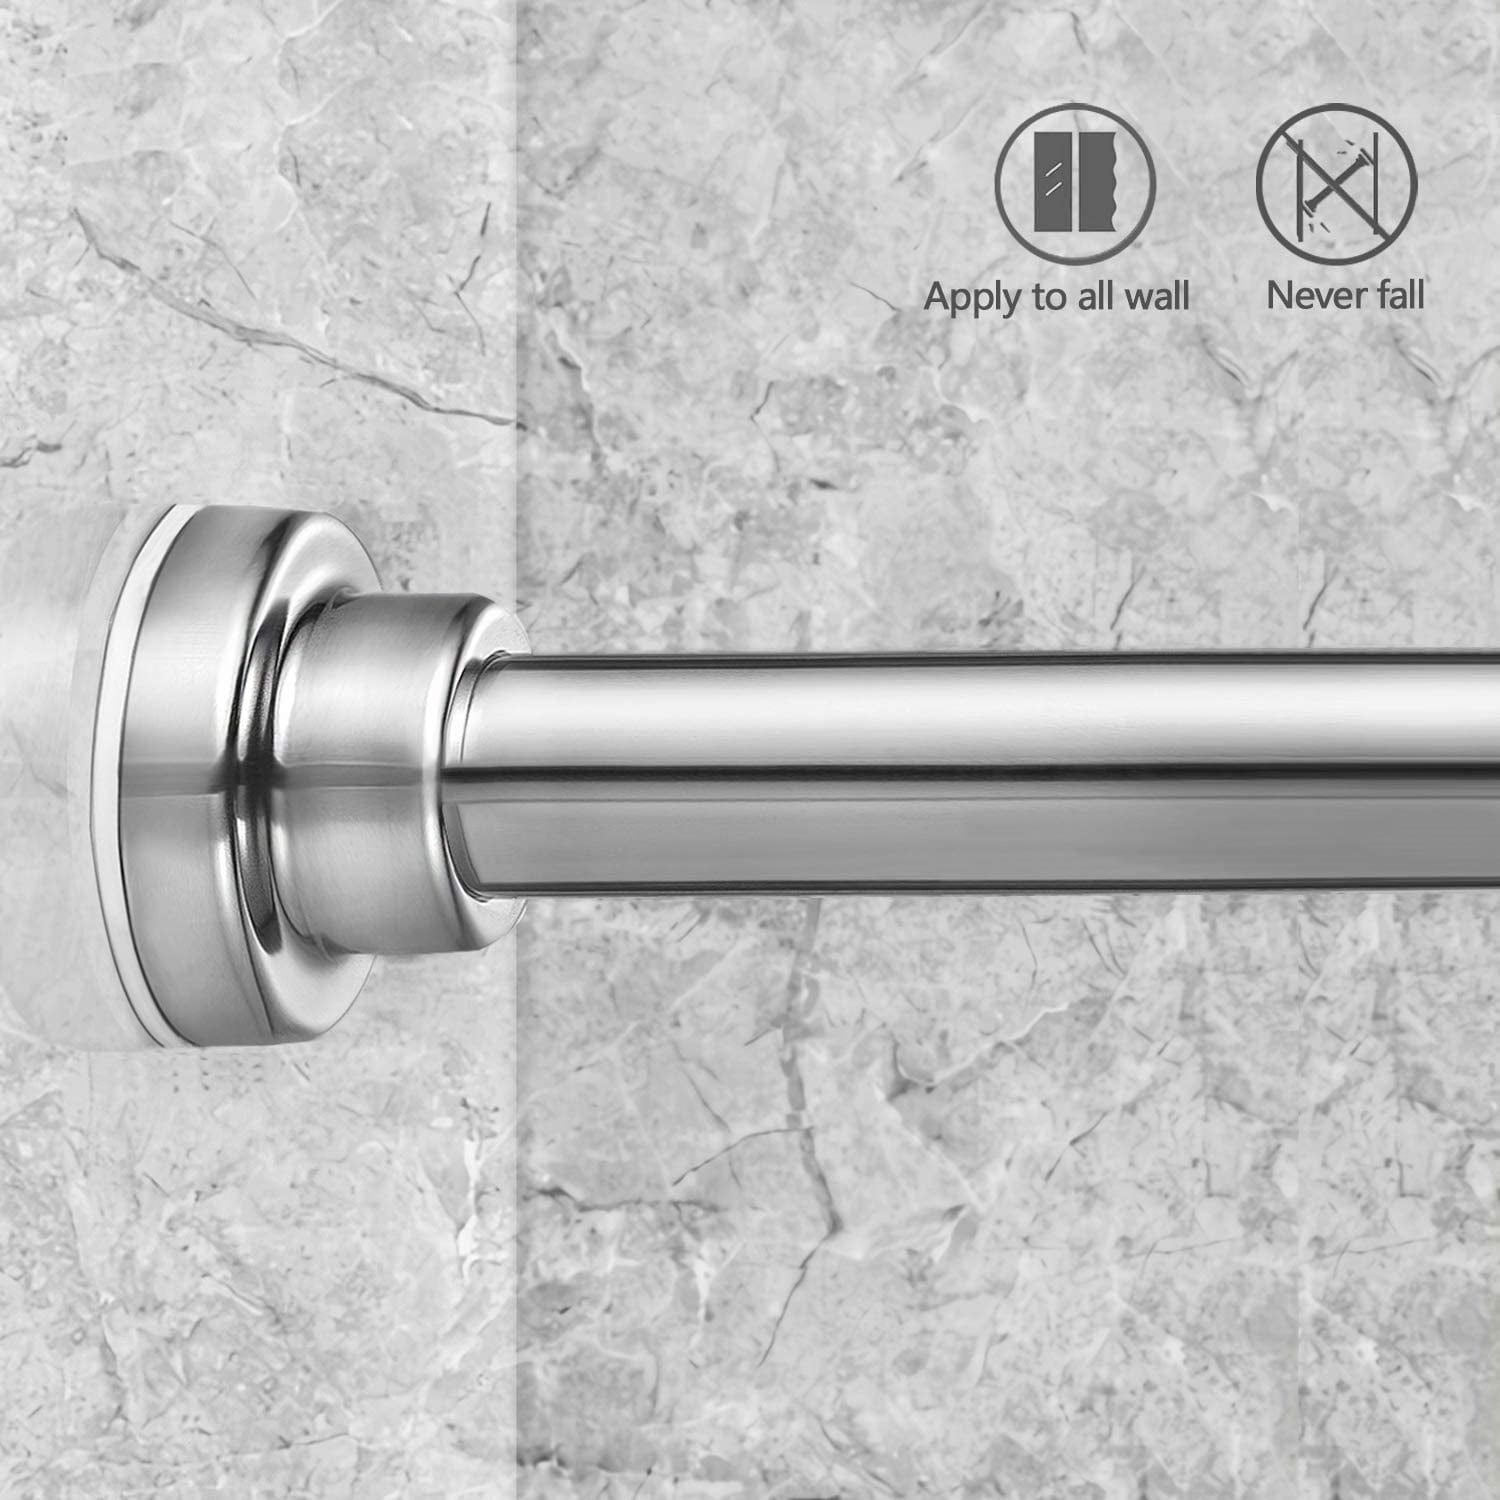 Garderobe No Drilling,304 Stainless Steel Non-Slip SACHUKOT Shower Curtain Rod extendable 25-40 Inches Never Rust Tension Curtain Rod Never Collapse,for Bathroom,Kitchen